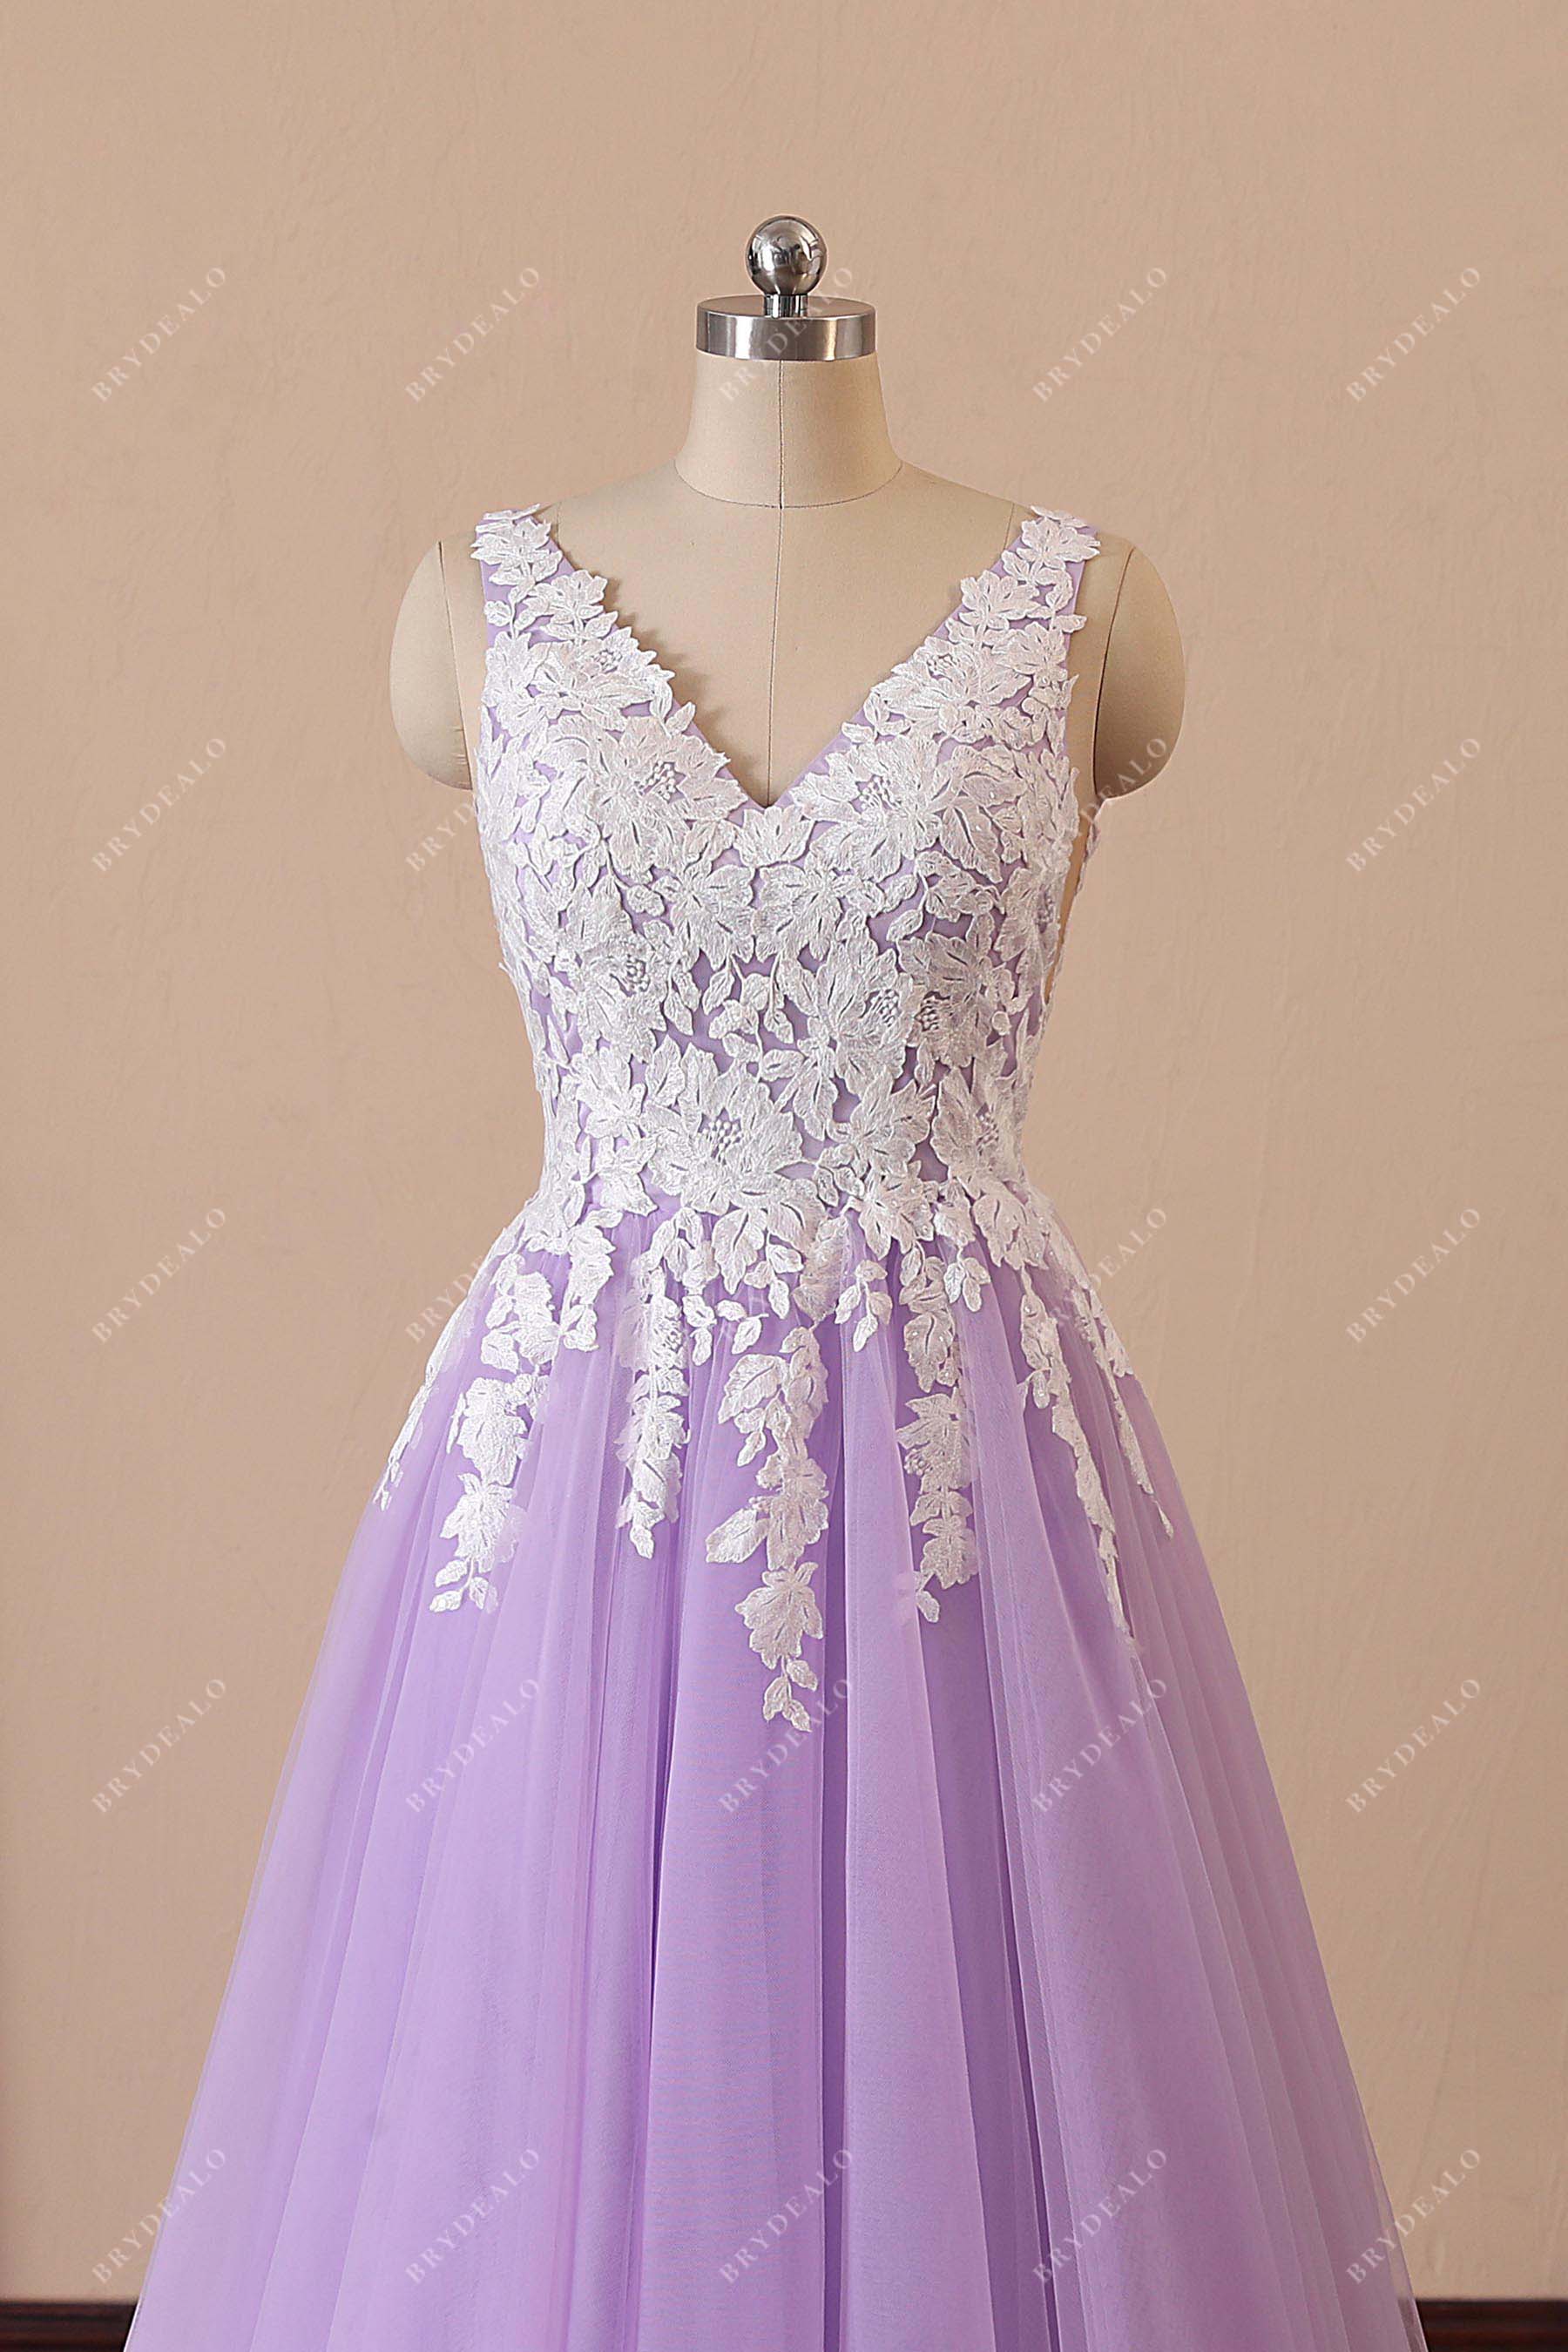 V-neck ivory lace overlaid lilac prom gown